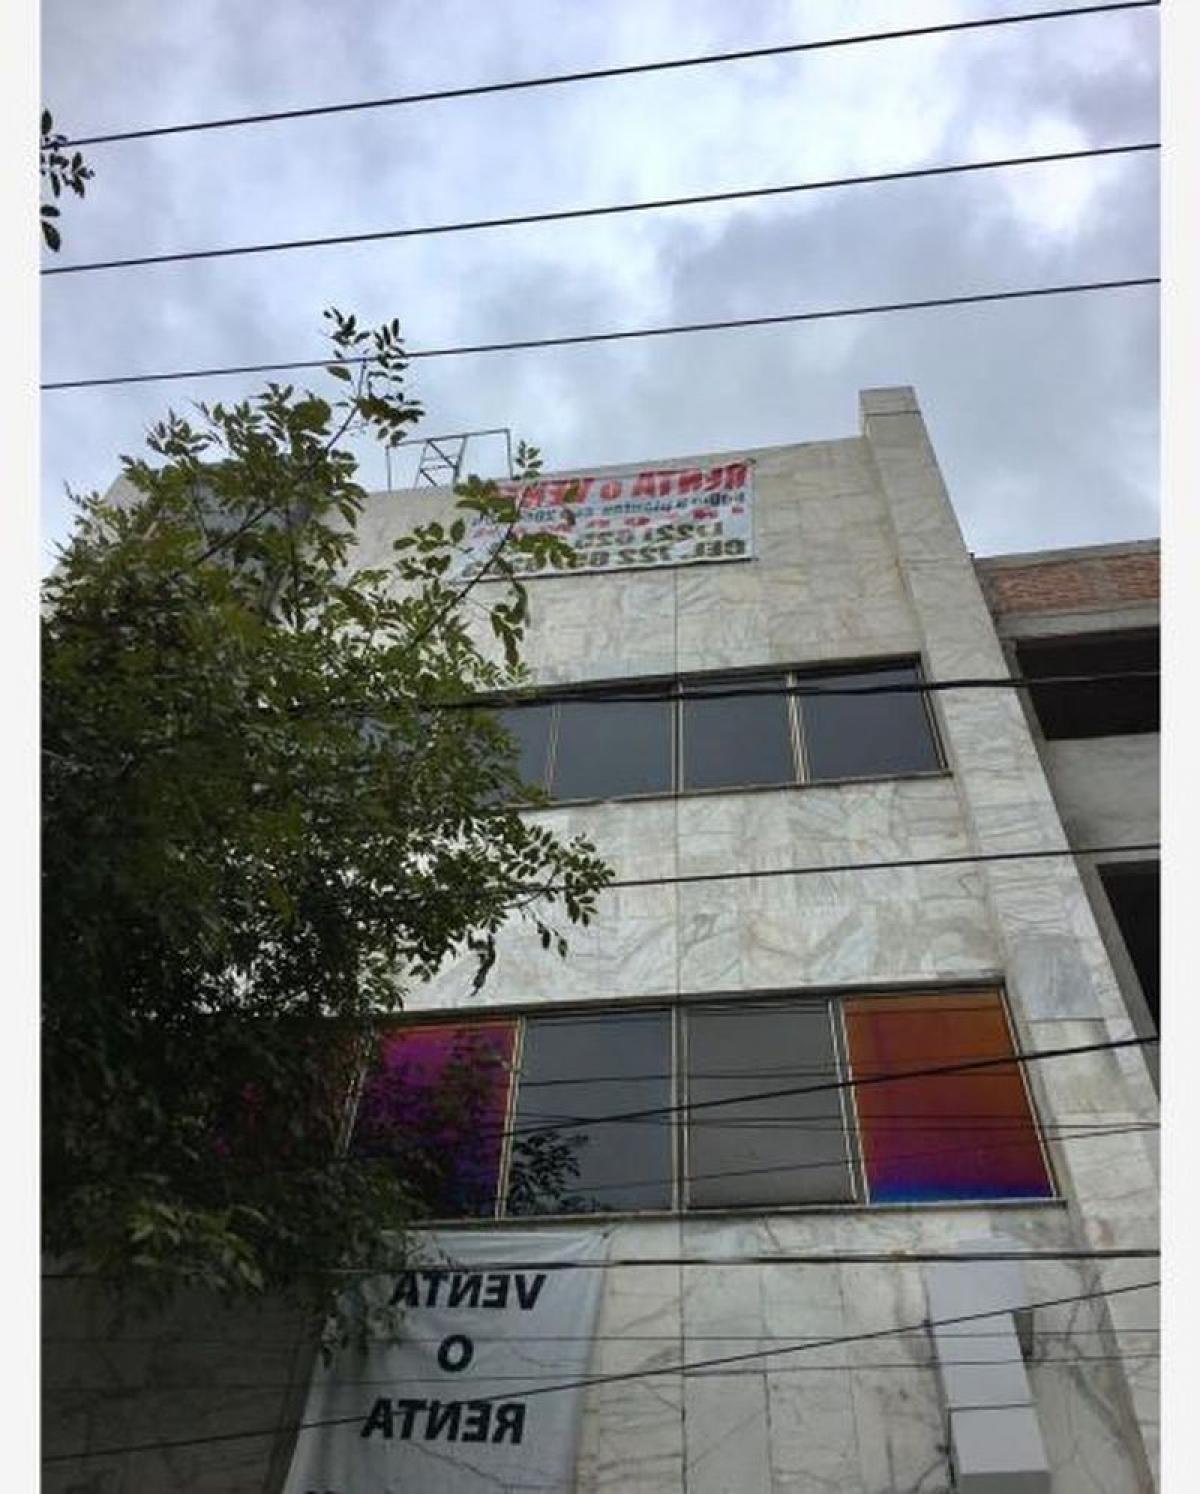 Picture of Apartment Building For Sale in Toluca, Mexico, Mexico